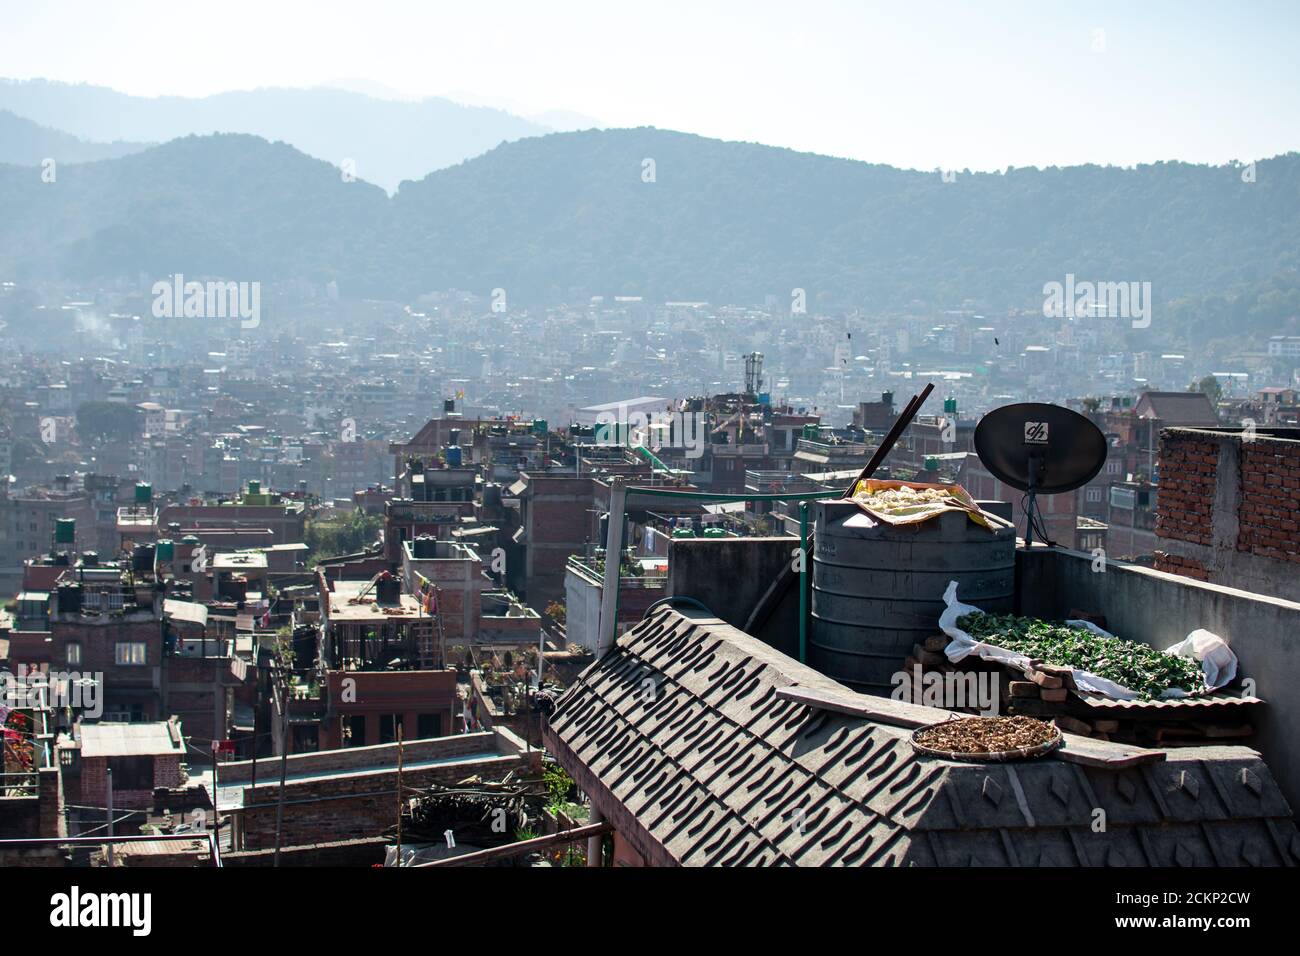 Bhaktapur, Kathmandu, Nepal - December 23, 2019: Cityscape view from a roof top over fruits and vegetables drying in the sun with the city in the back Stock Photo